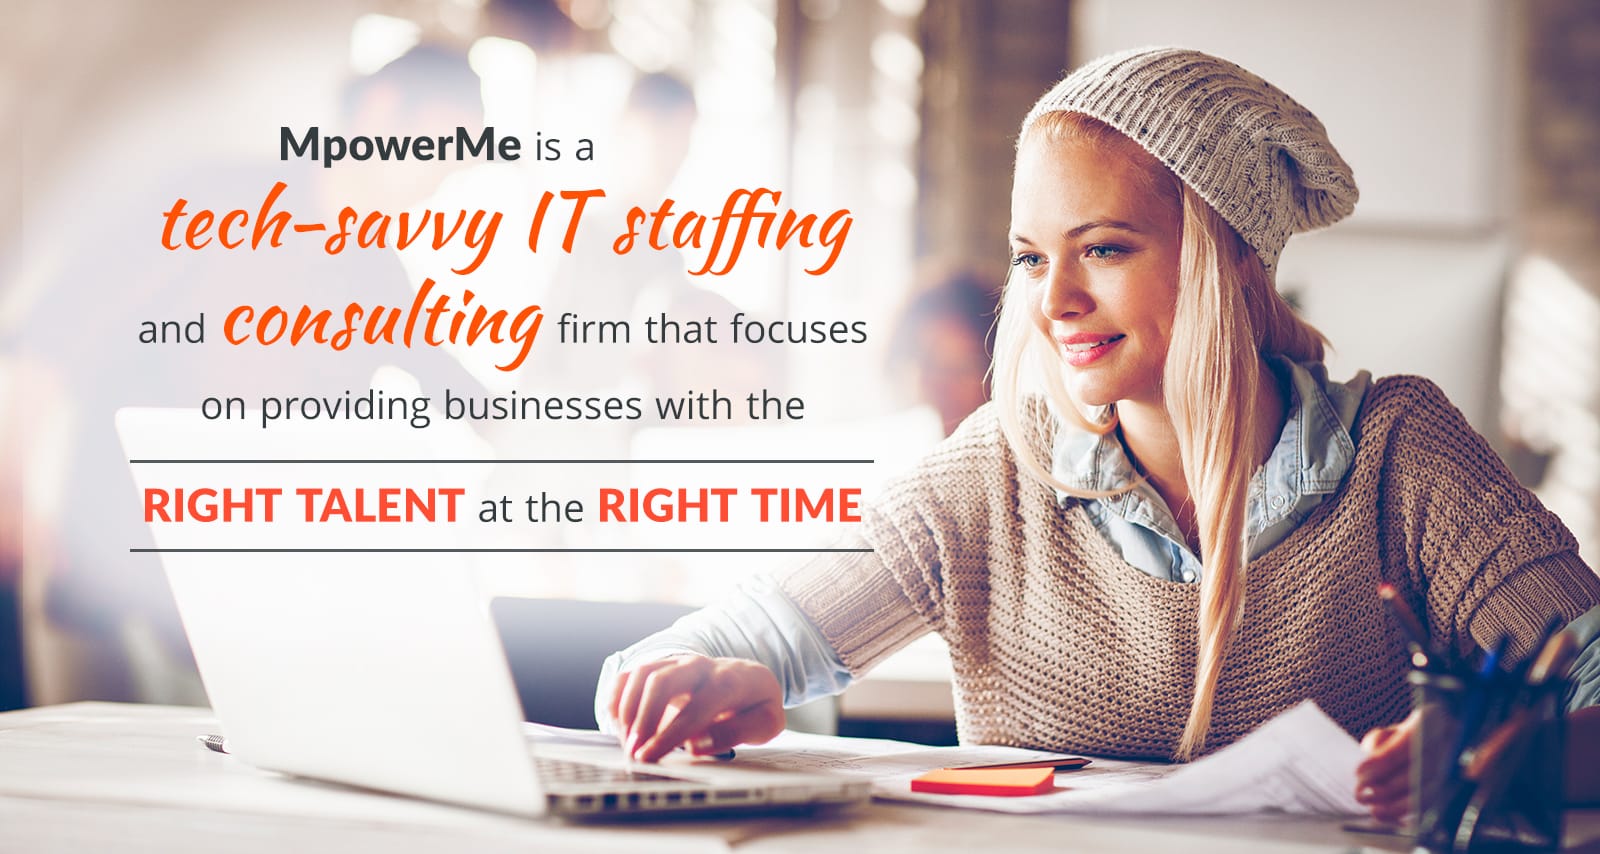 MpowerMe is a tech-savvy IT recruiting and staffing agency